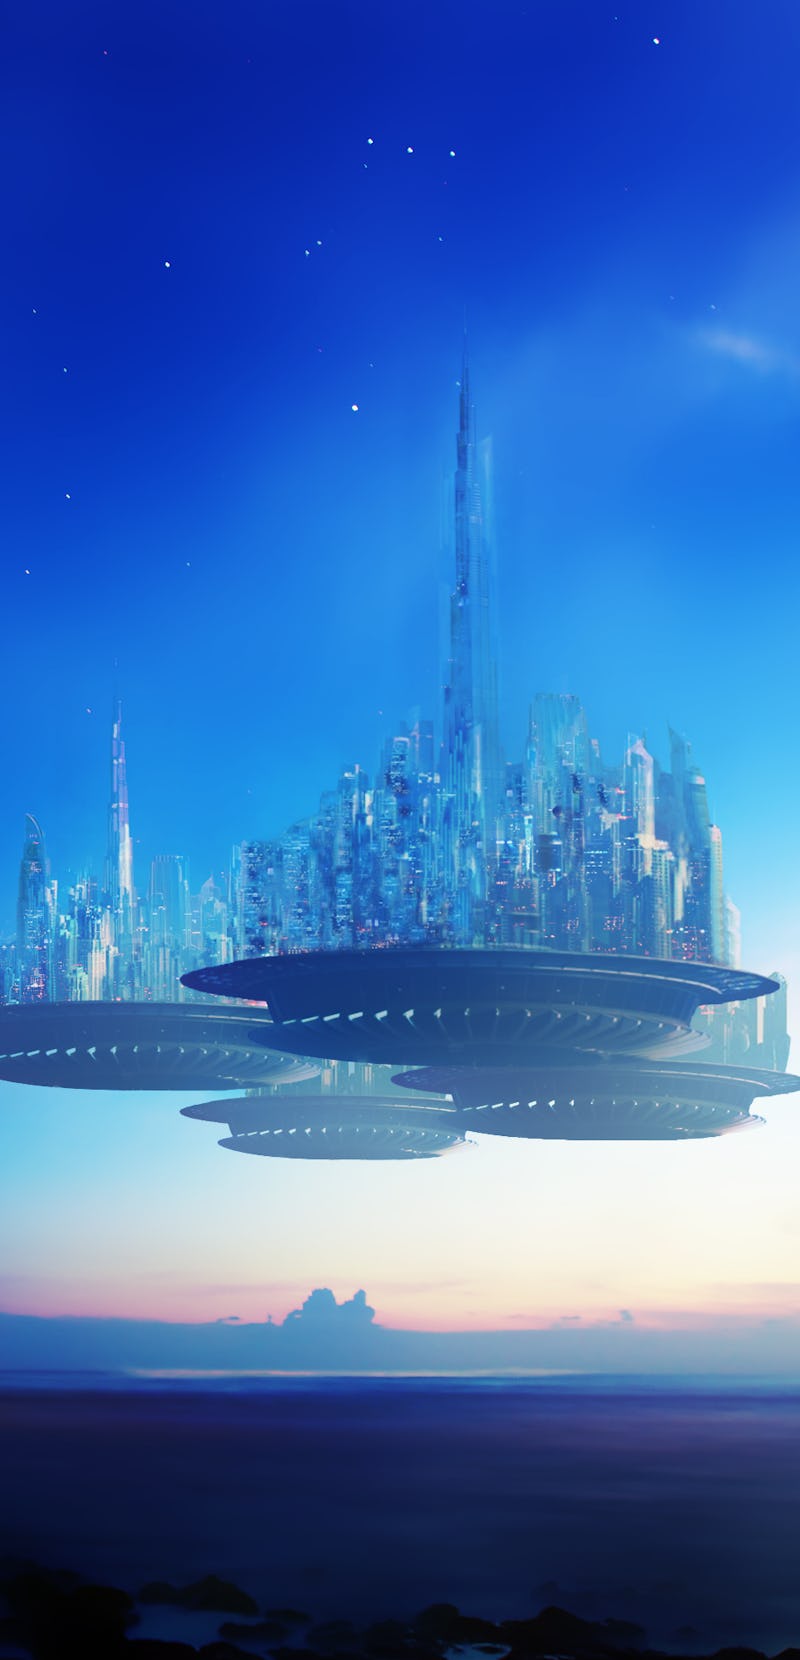 Fictional city of the future. Portrait of a Utopian society. 